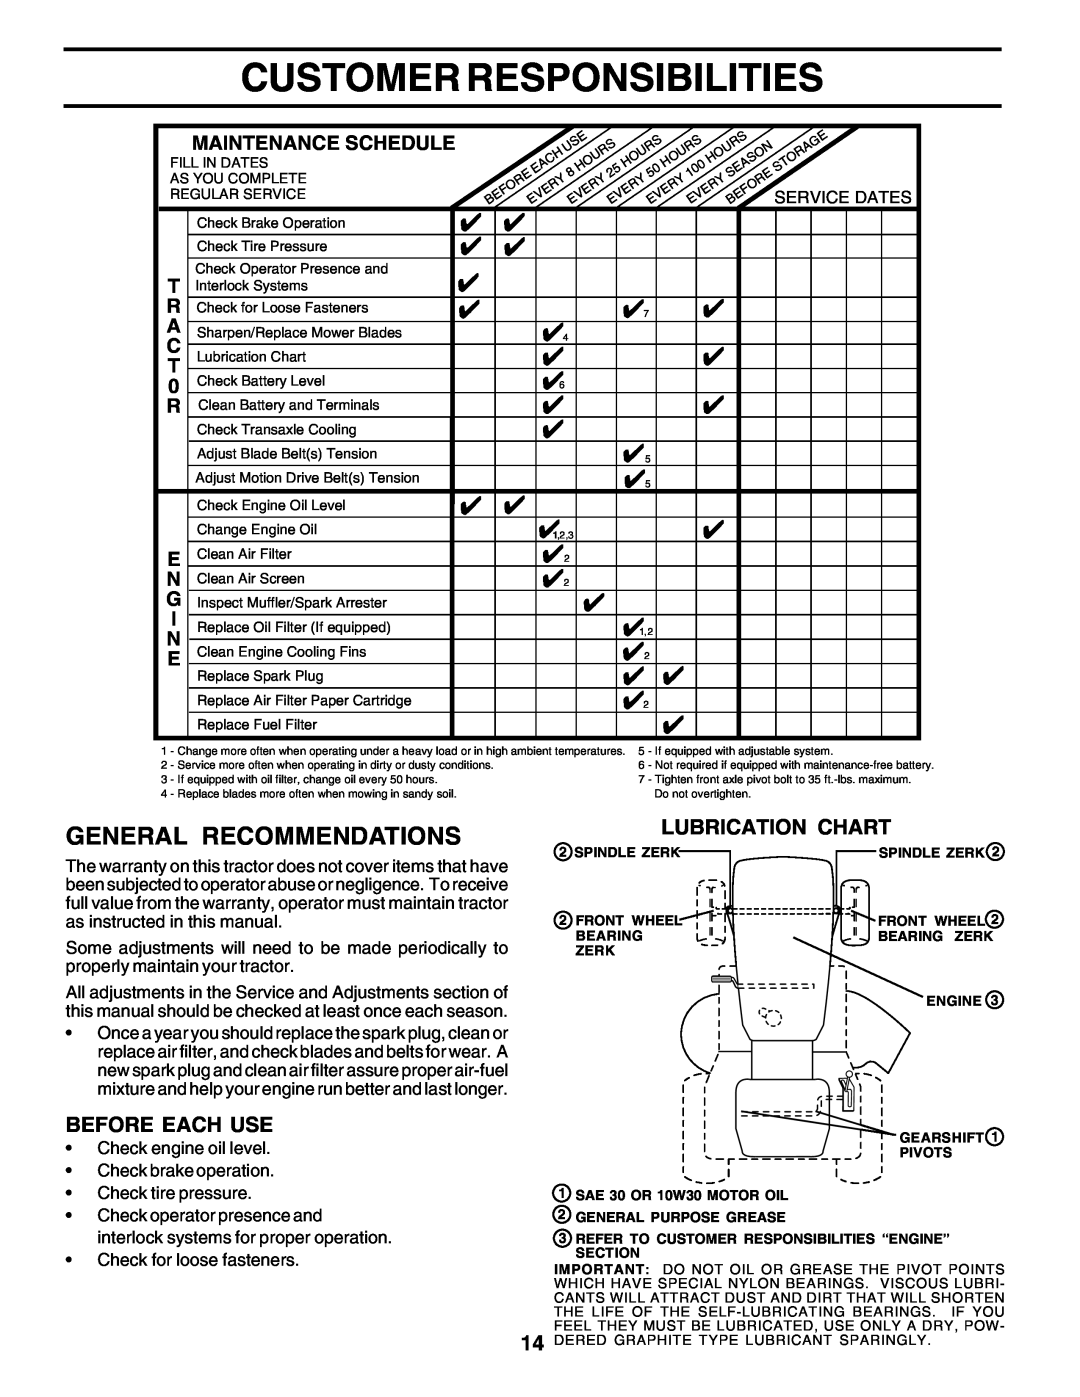 Poulan 180198 Customer Responsibilities, General Recommendations, Lubrication Chart, Before Each Use, Maintenance Schedule 